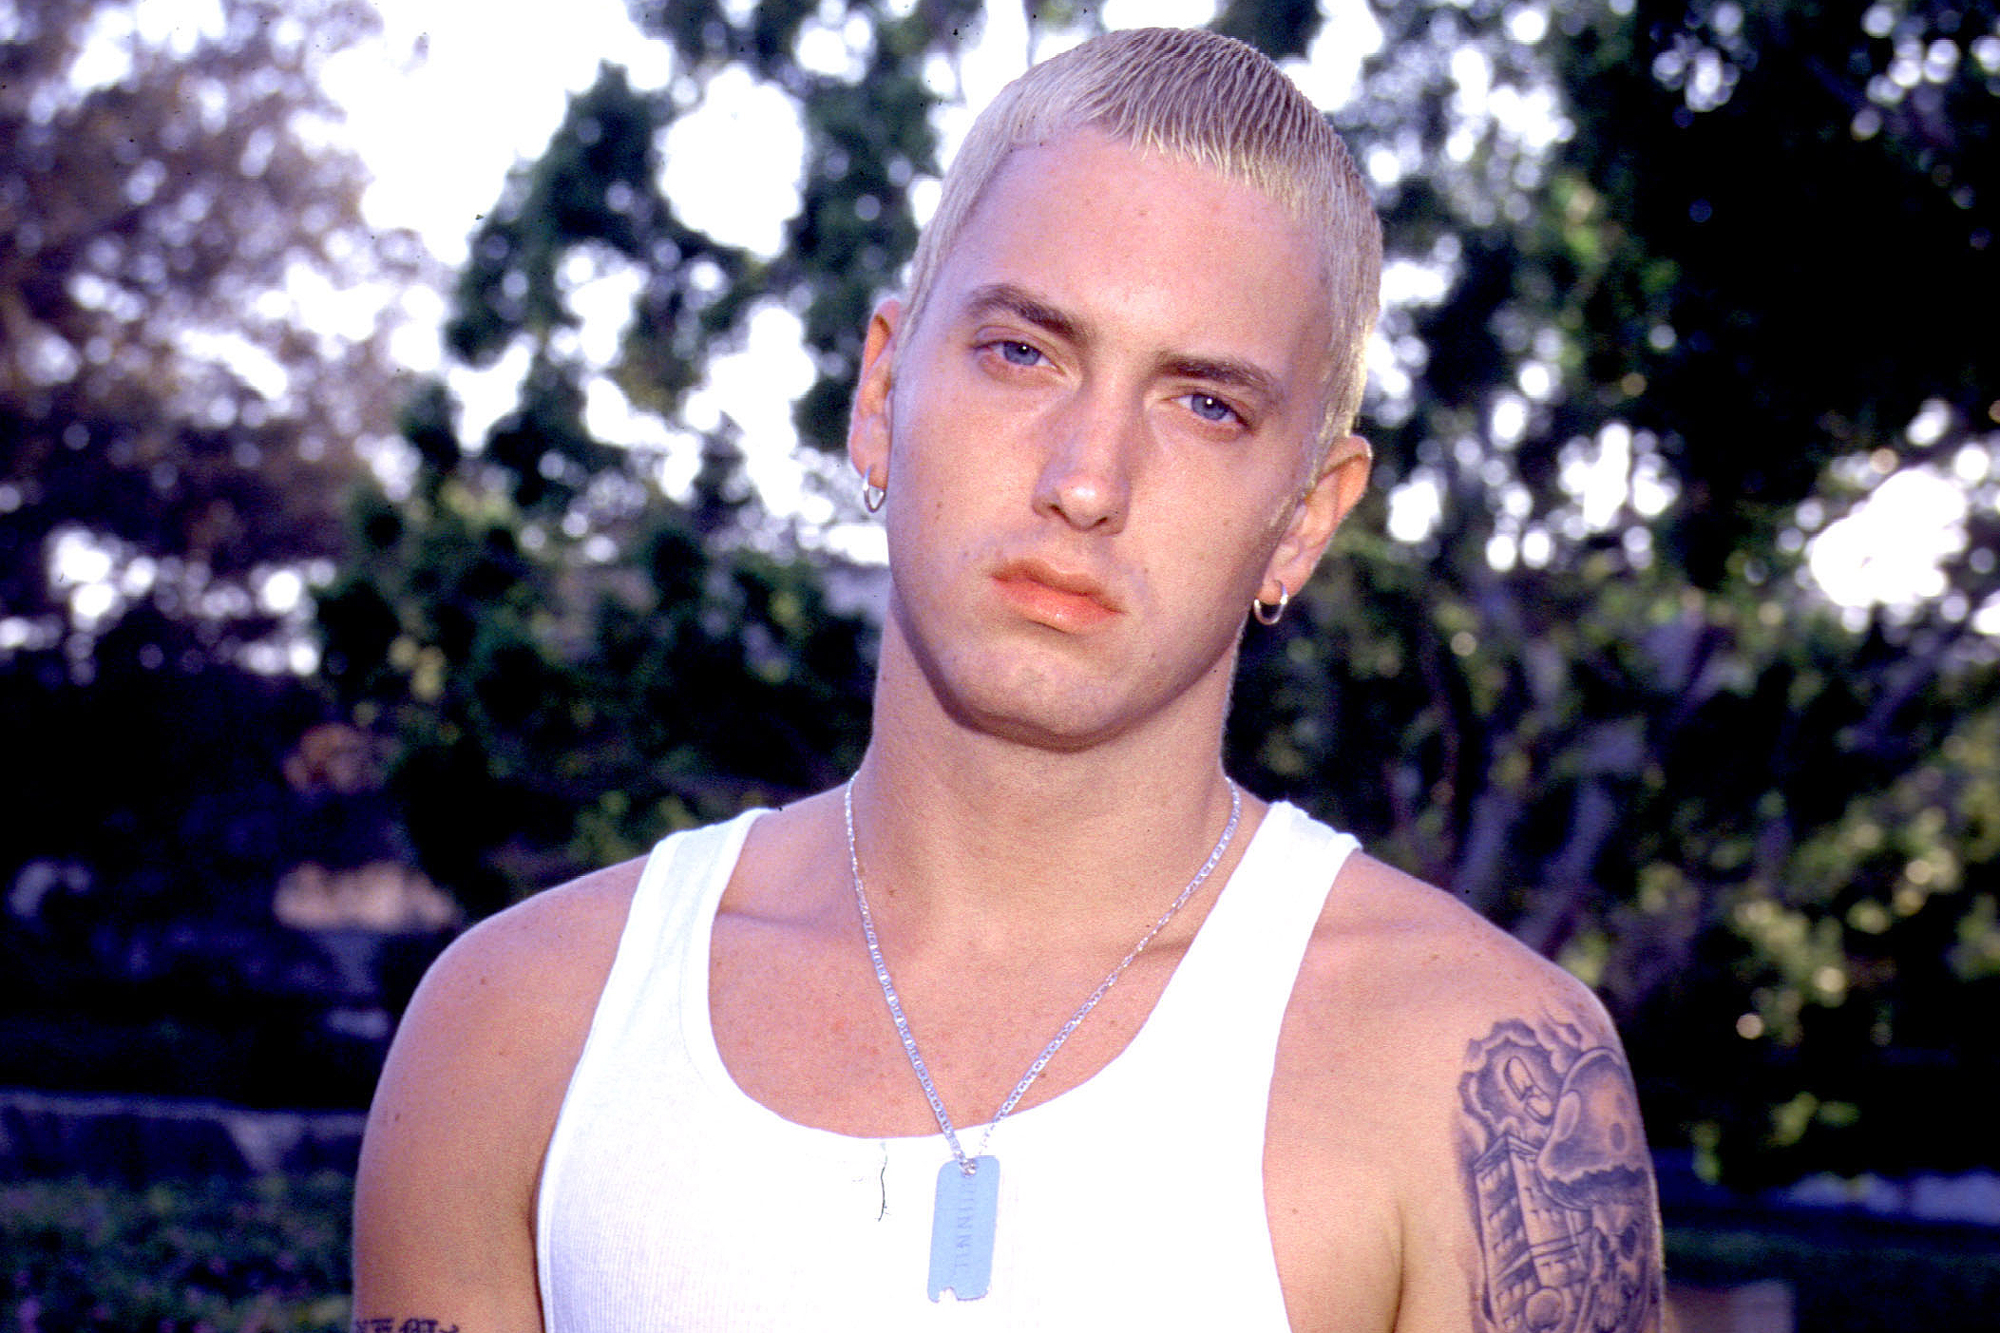 Eminem's long blonde hair in the "The Real Slim Shady" music video - wide 6